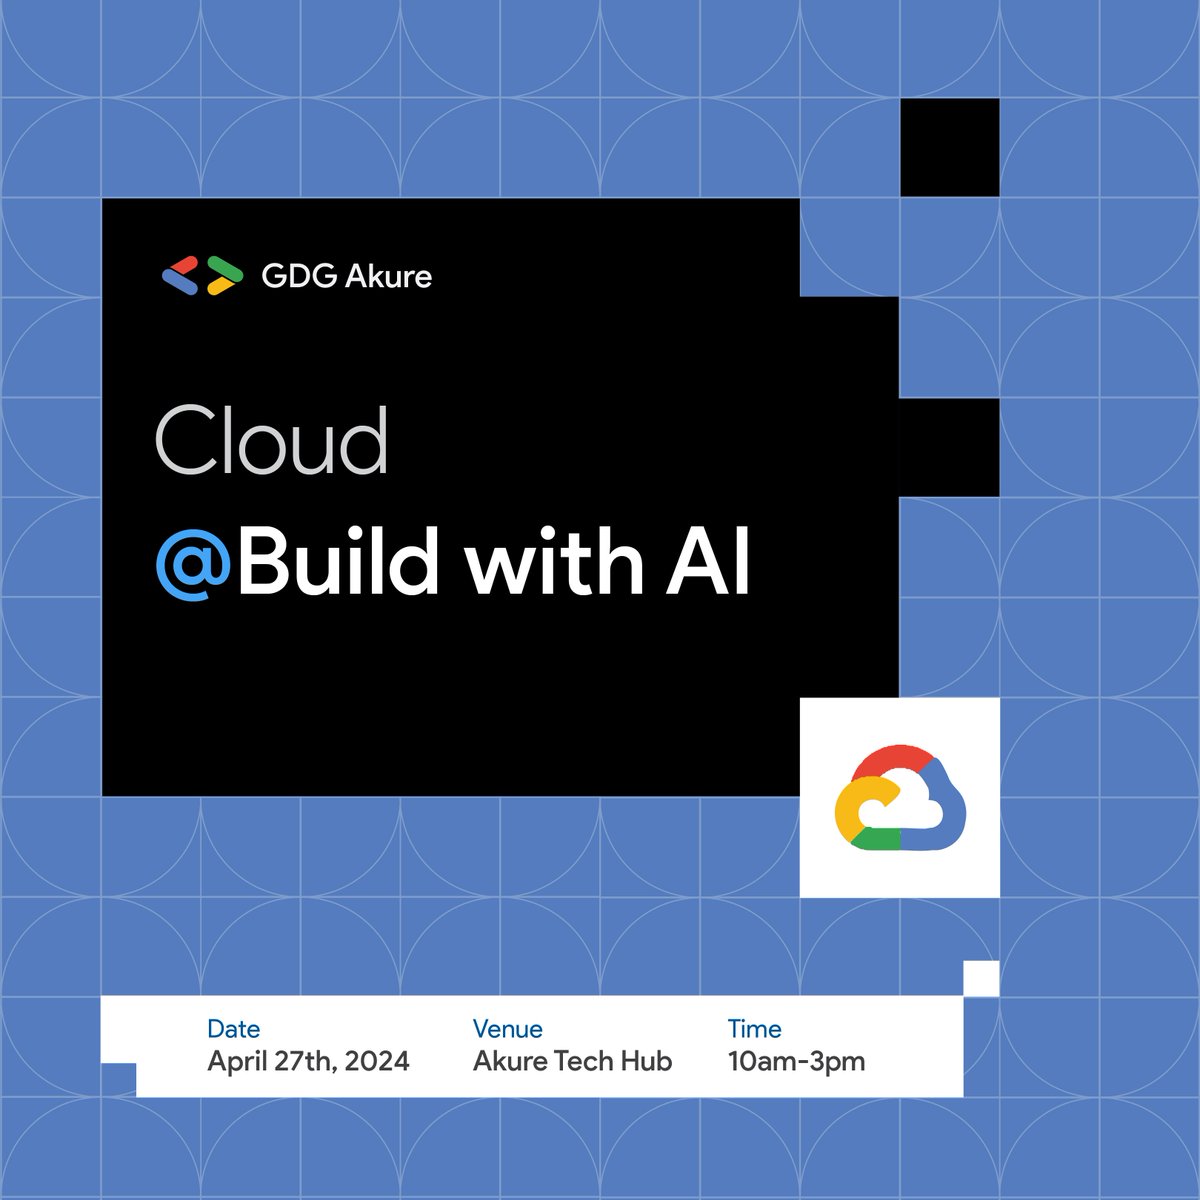 Join us in the next part of our #BuildWithAI Series as we traverse the Cloud. Don't miss this opportunity to move your skill to the next level Register now: gdg.community.dev/events/details…